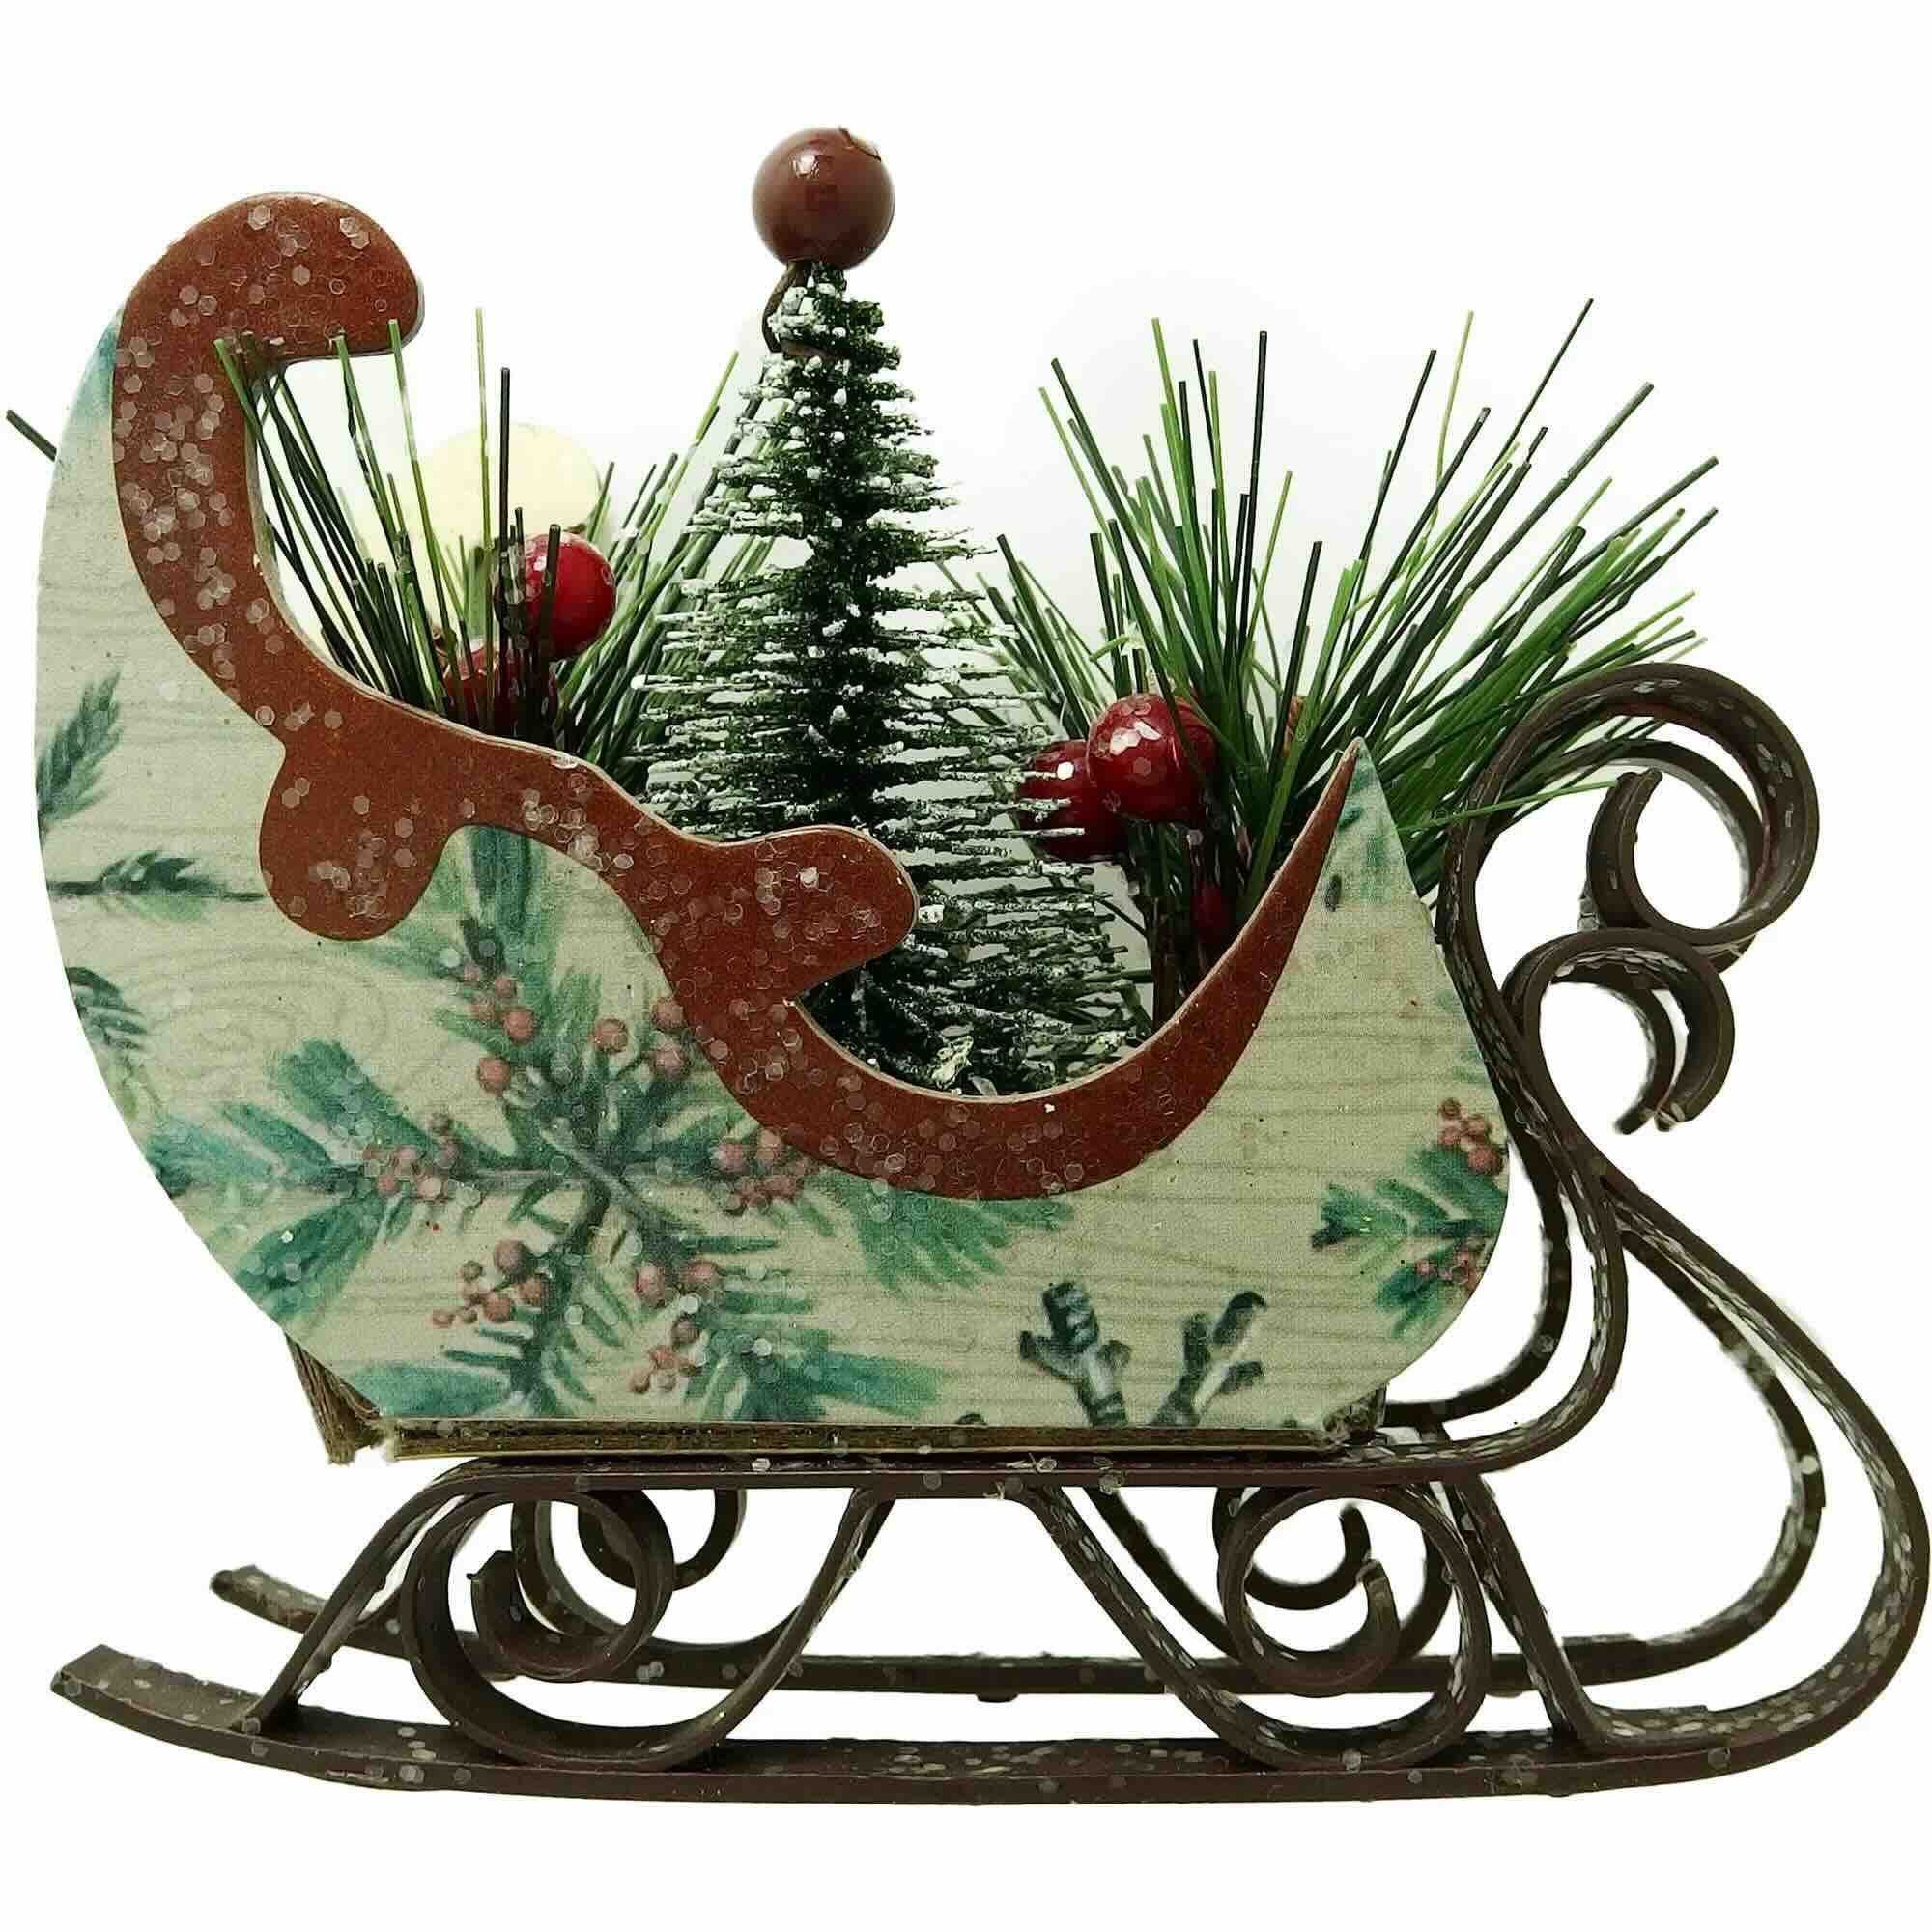 How To Add Greenery To A Sleigh